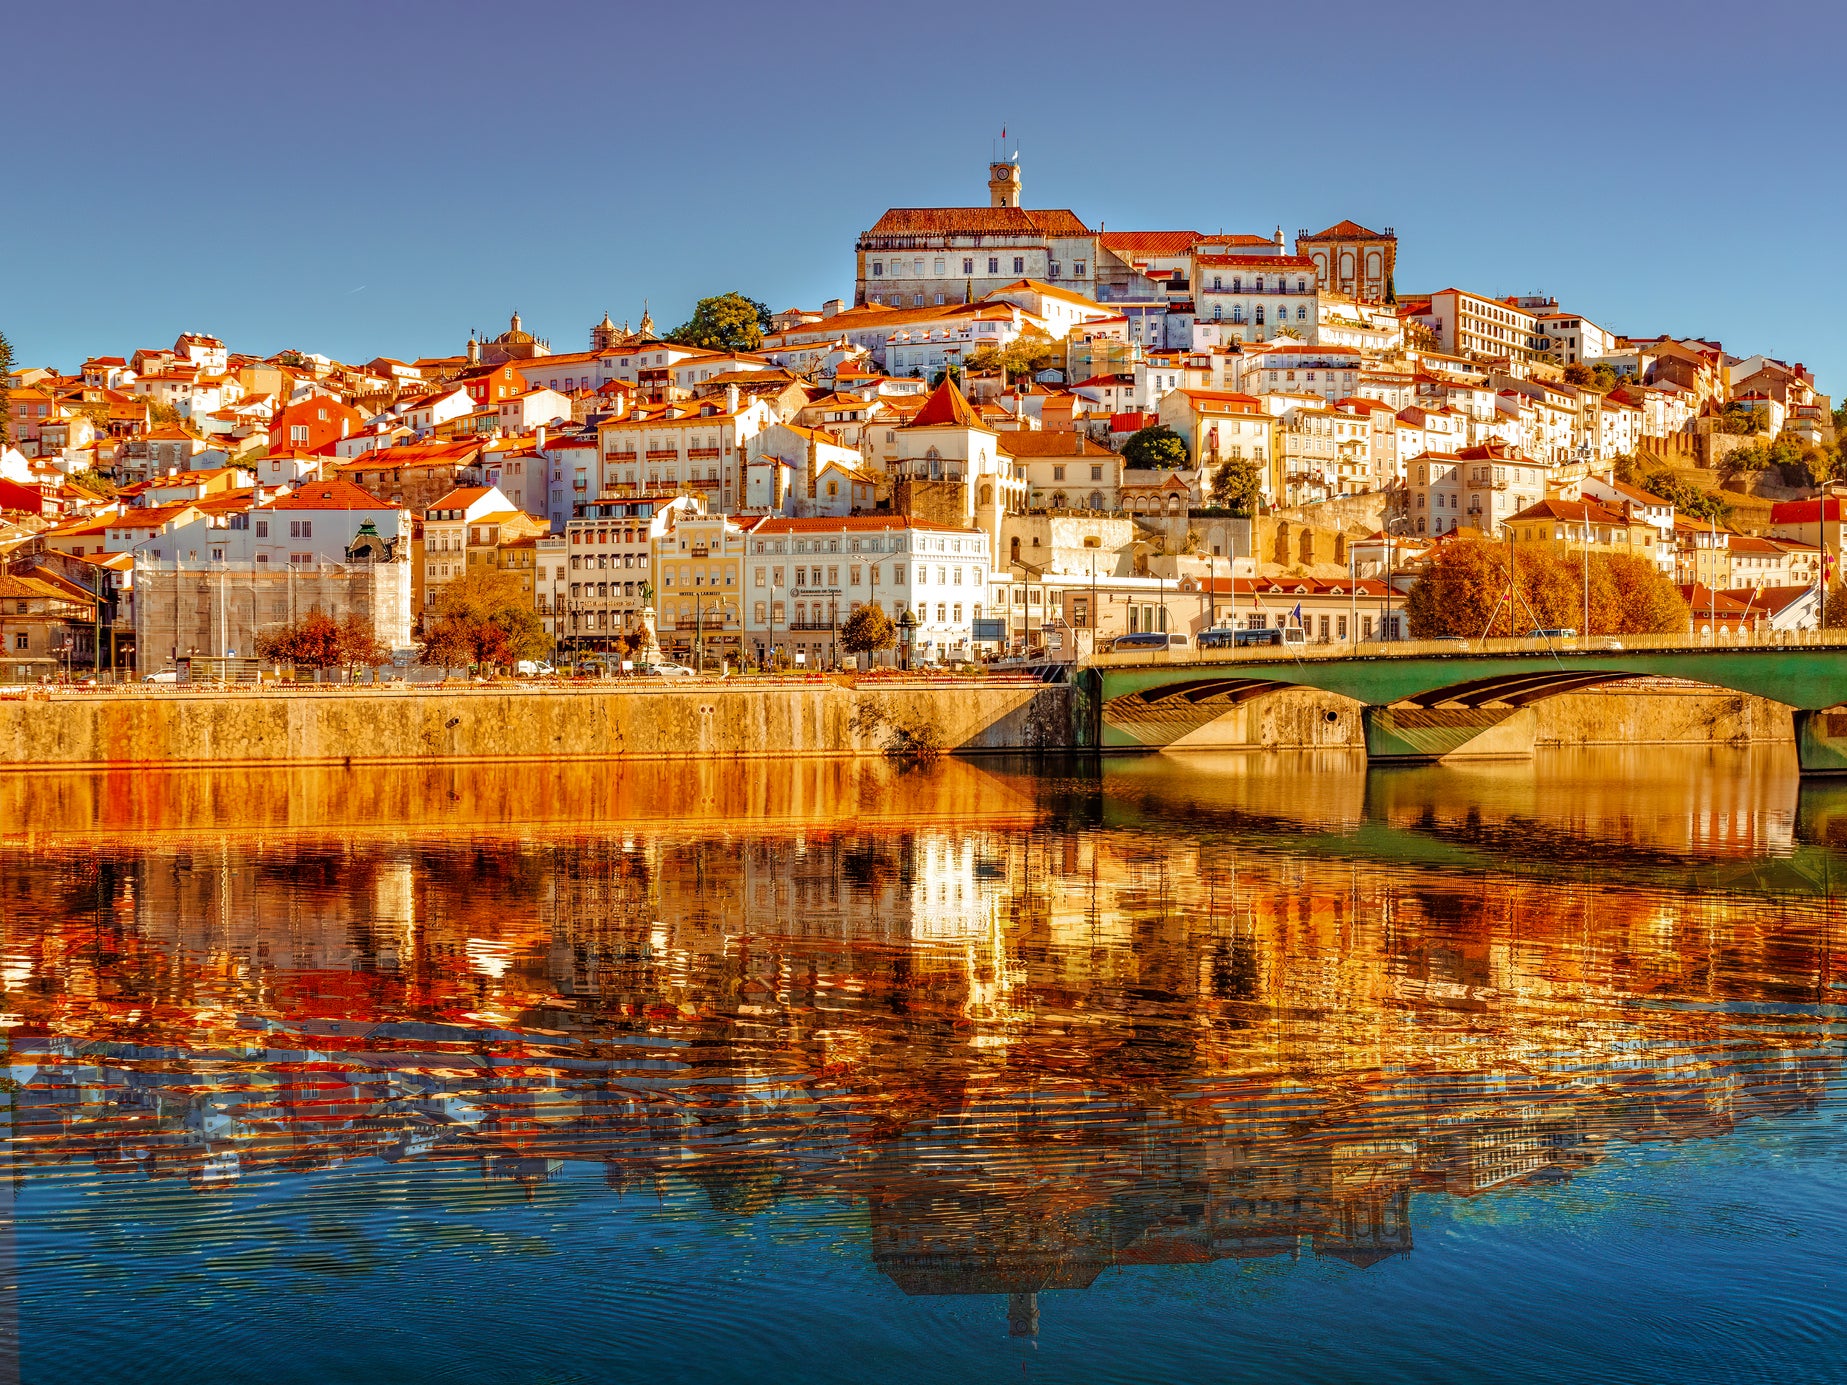 This central Portugese city has the oldest university in the country